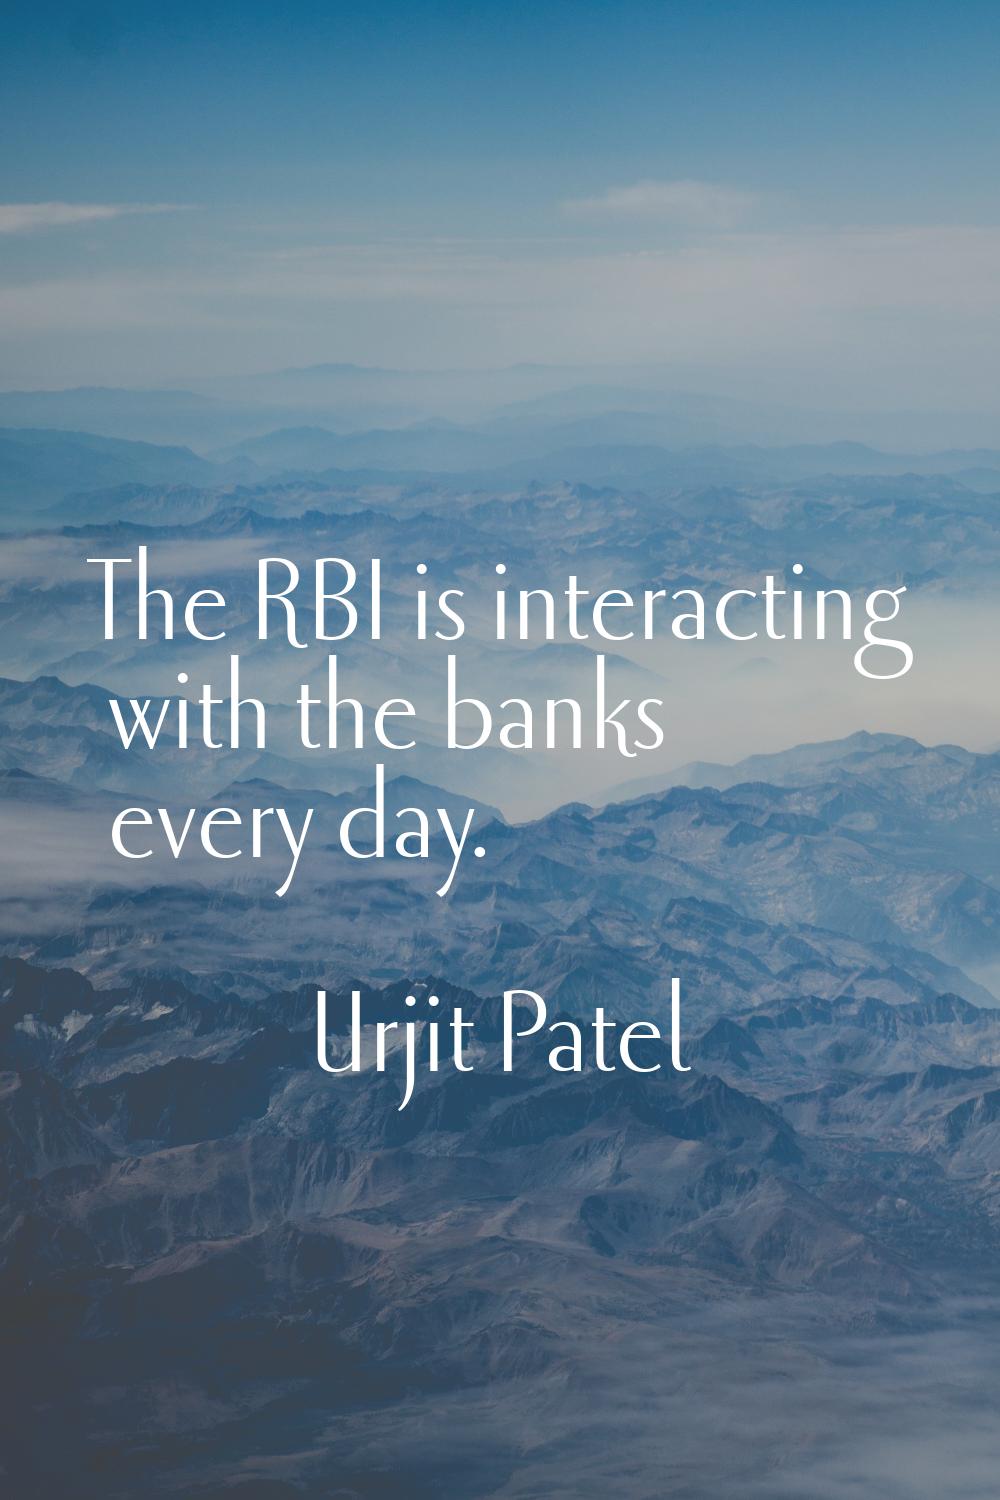 The RBI is interacting with the banks every day.